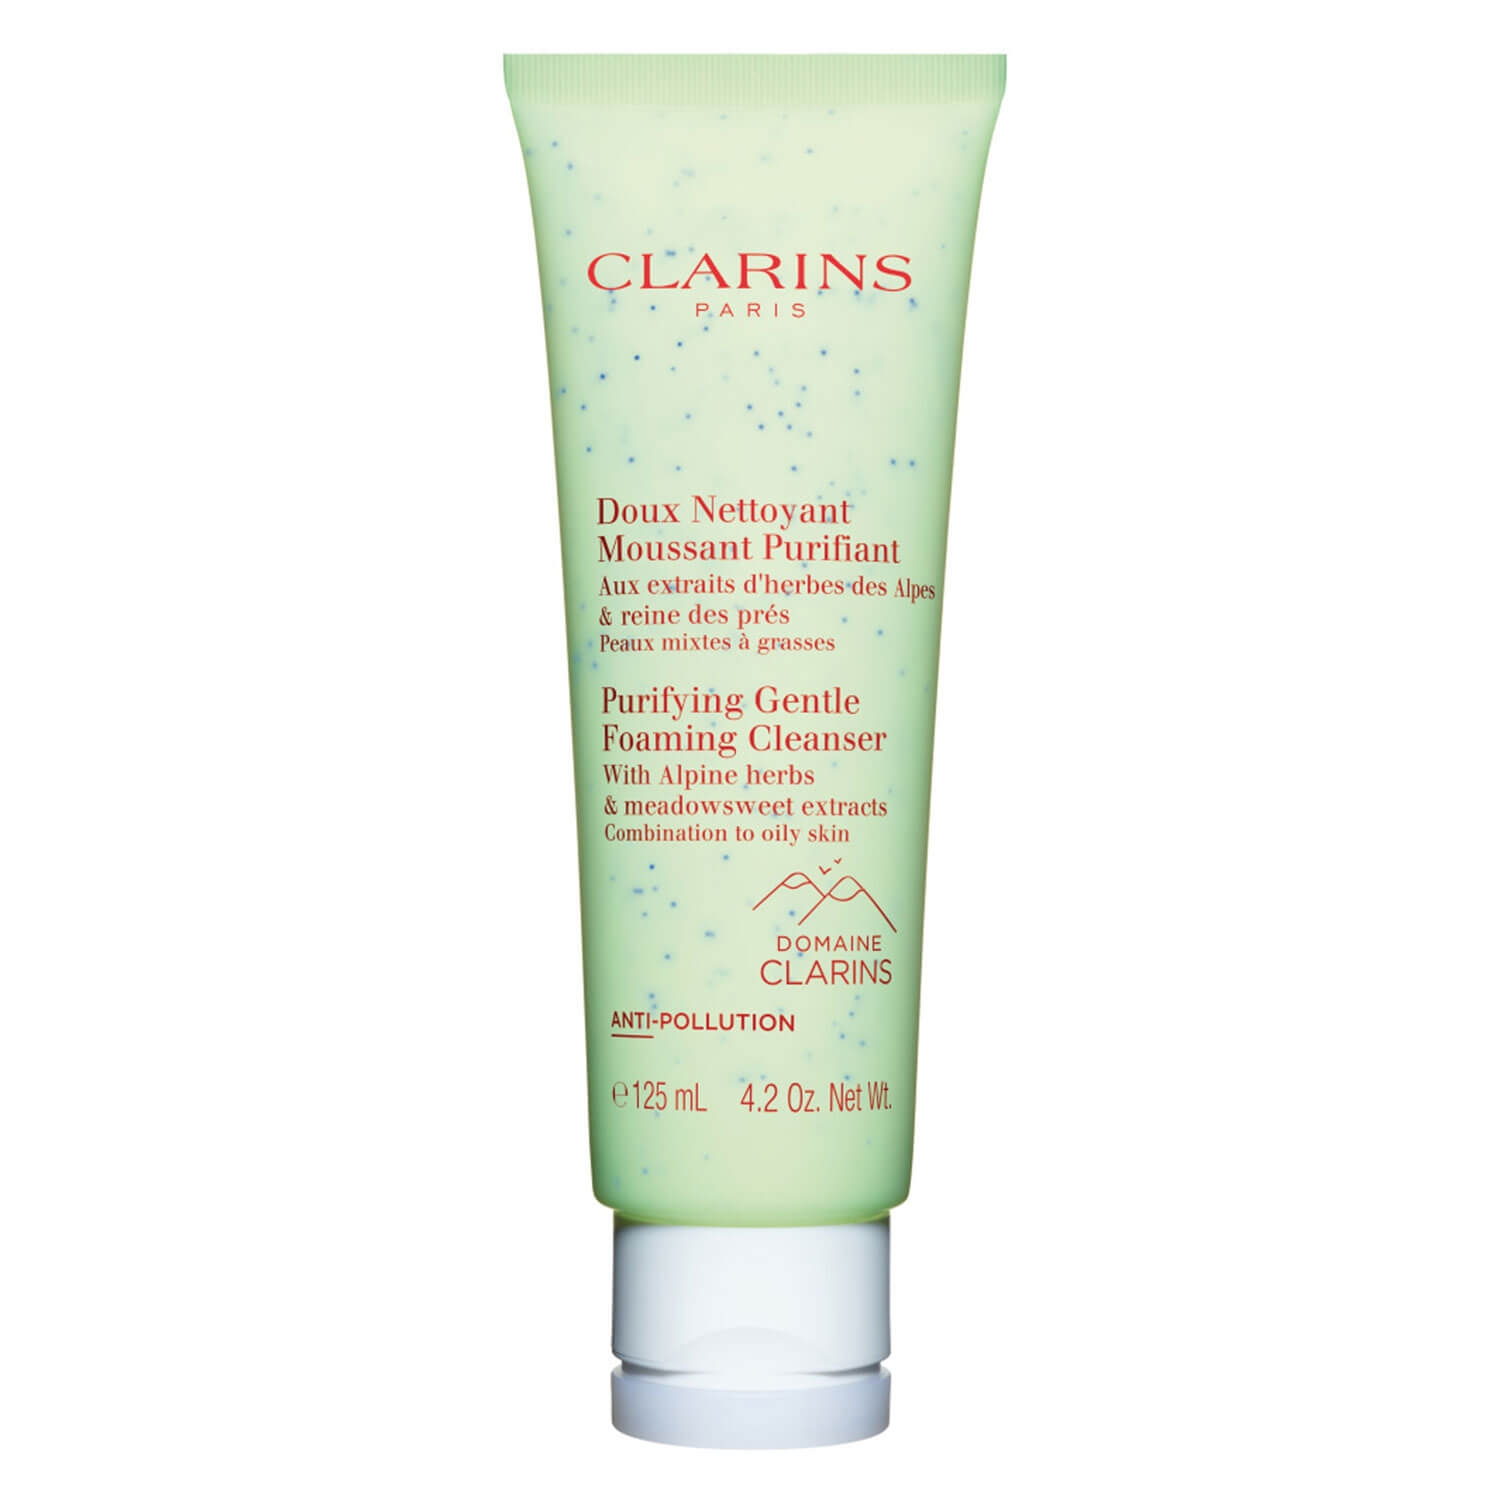 Product image from Clarins Cleansers - Doux Nettoyant Moussant Purifiant